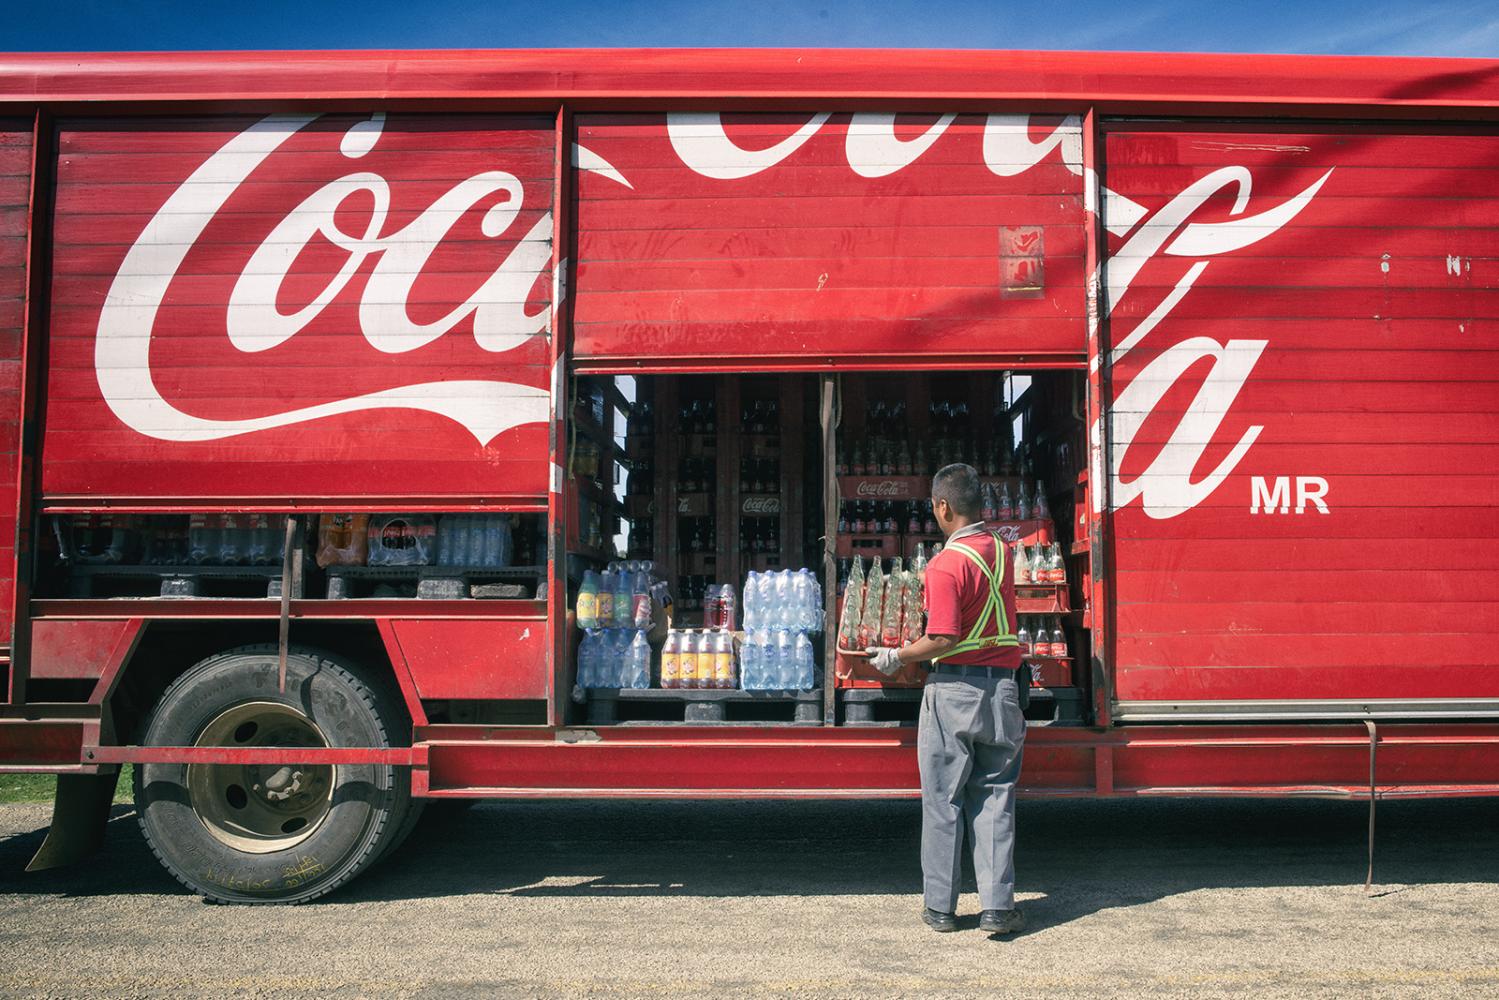 Widespread delivery of CocaCola in the rural areas of Chiapas.